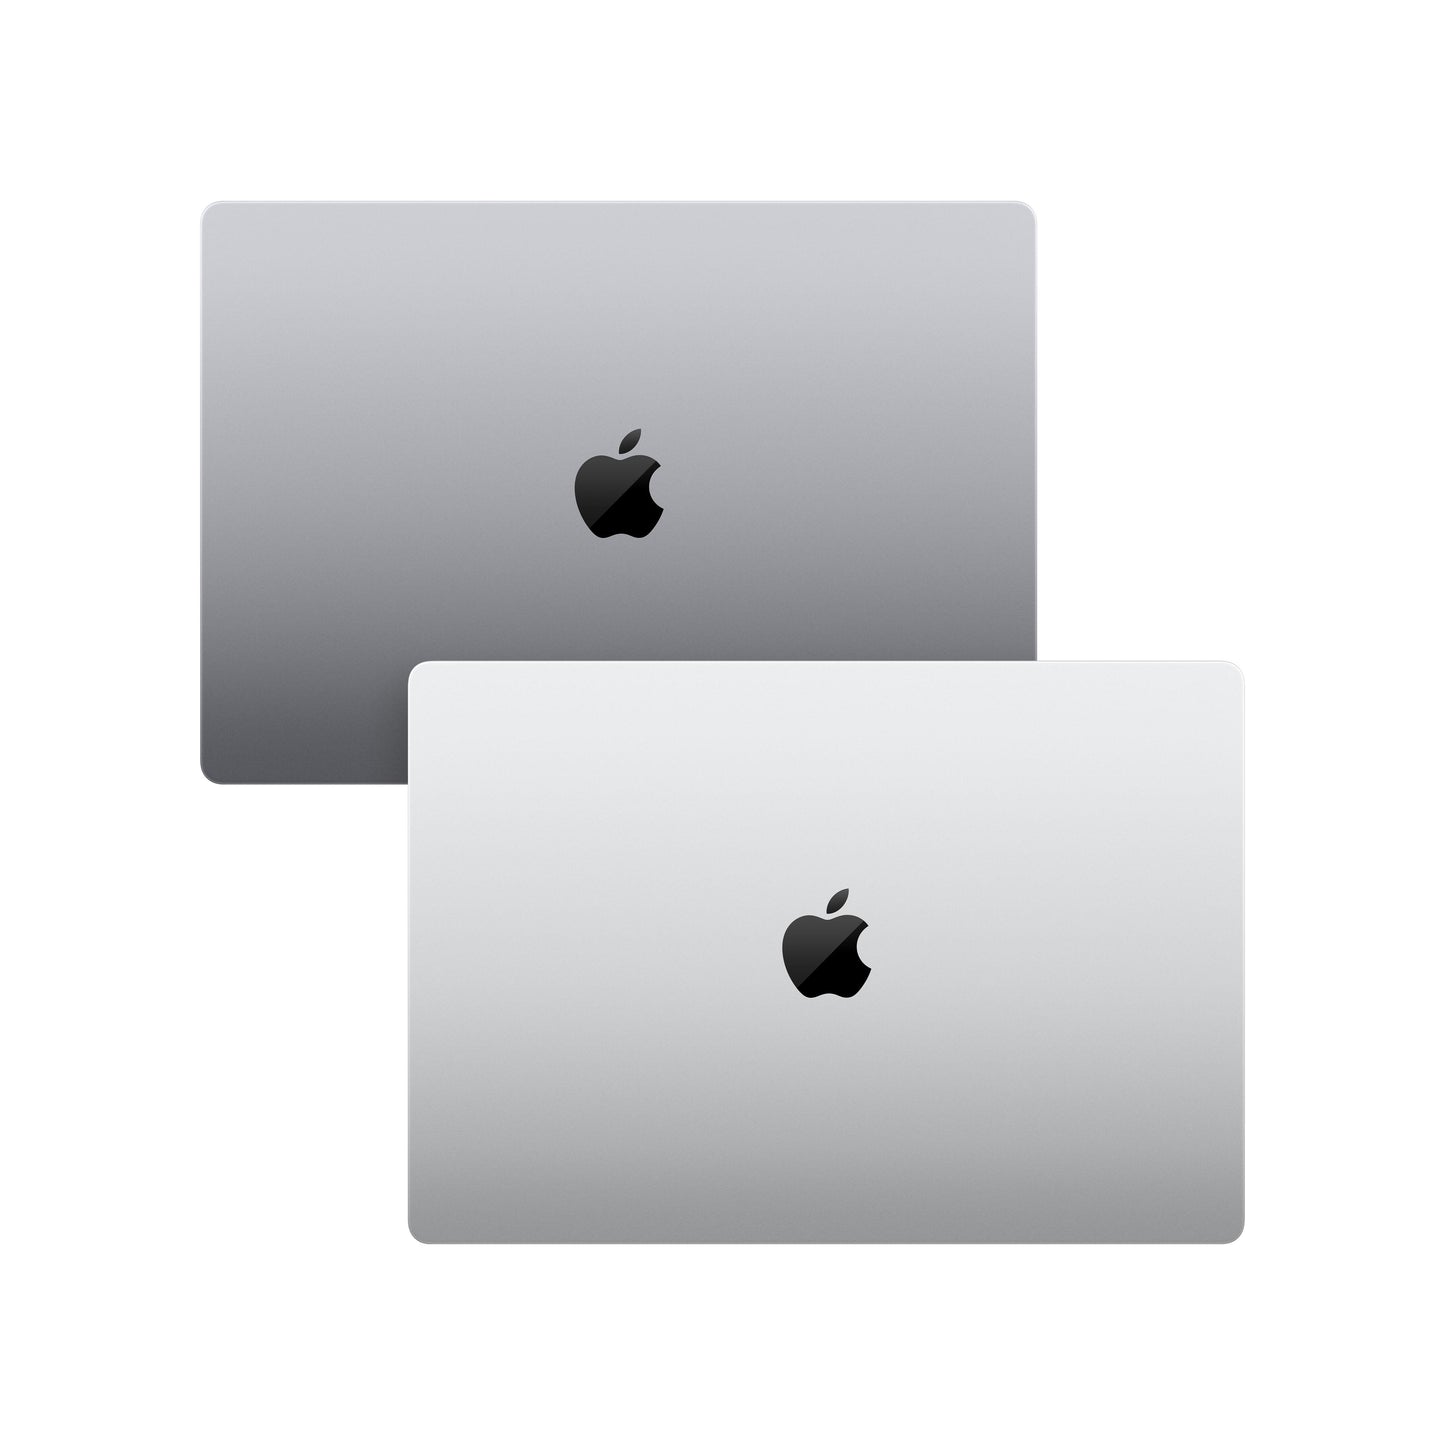 14-inch MacBook Pro: Apple M1 Pro chip with 8_core CPU and 14_core GPU, 512GB SSD - Space Grey